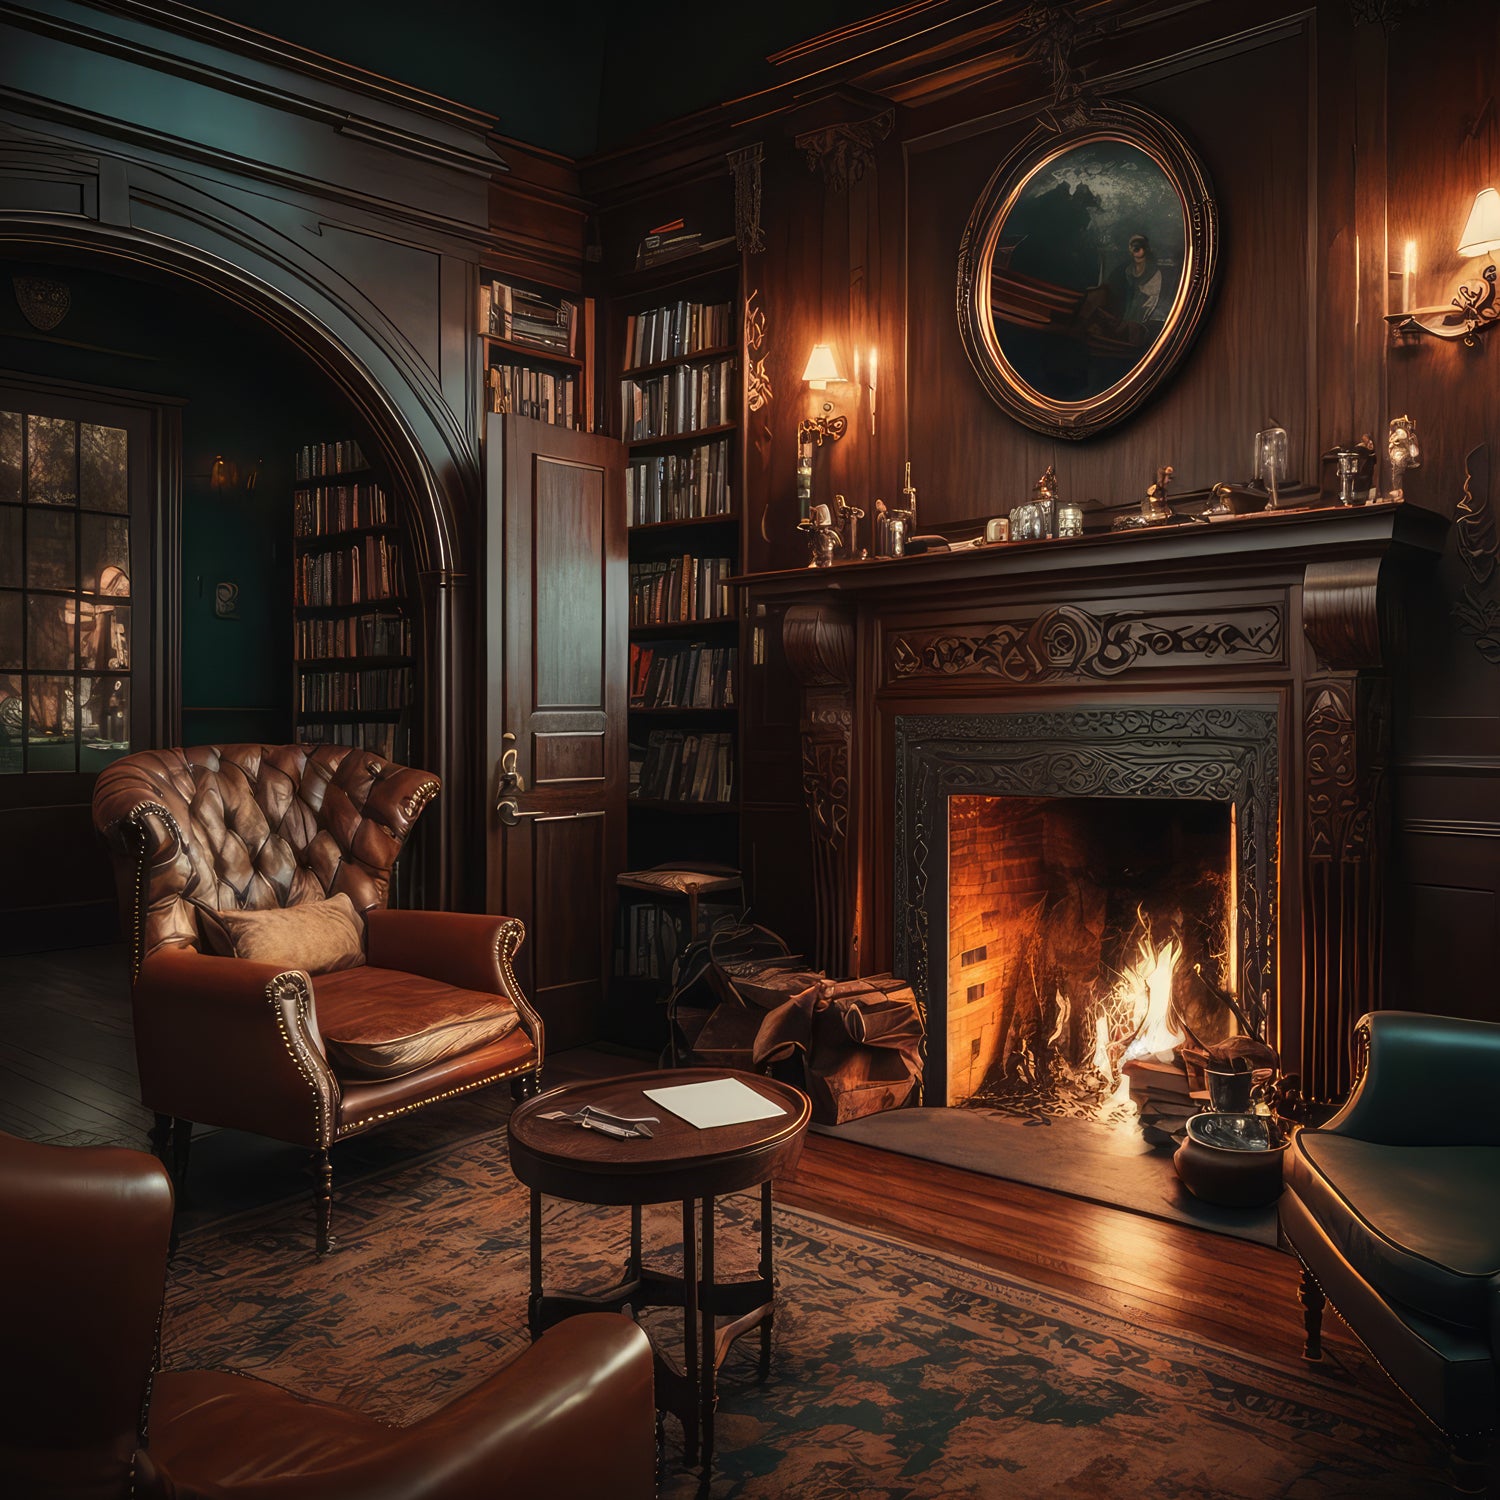 A roaring fire in a wood-paneled library room - inspiration for the masculine scented candle "Bronzed Fireside" from Tuscany Candle